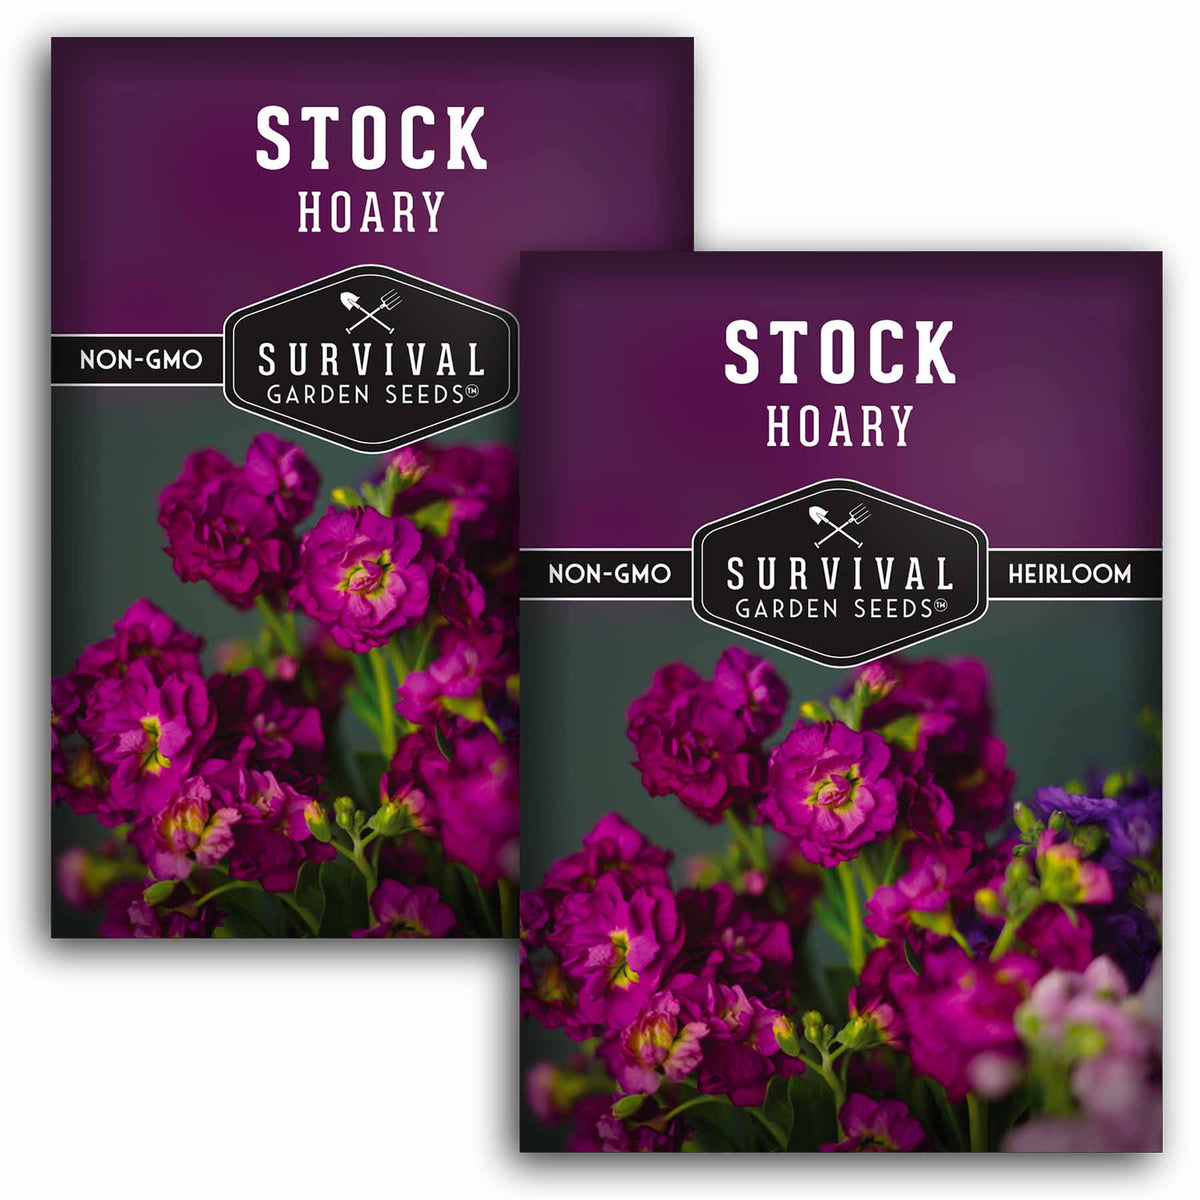 2 packets of Hoary Stock seeds